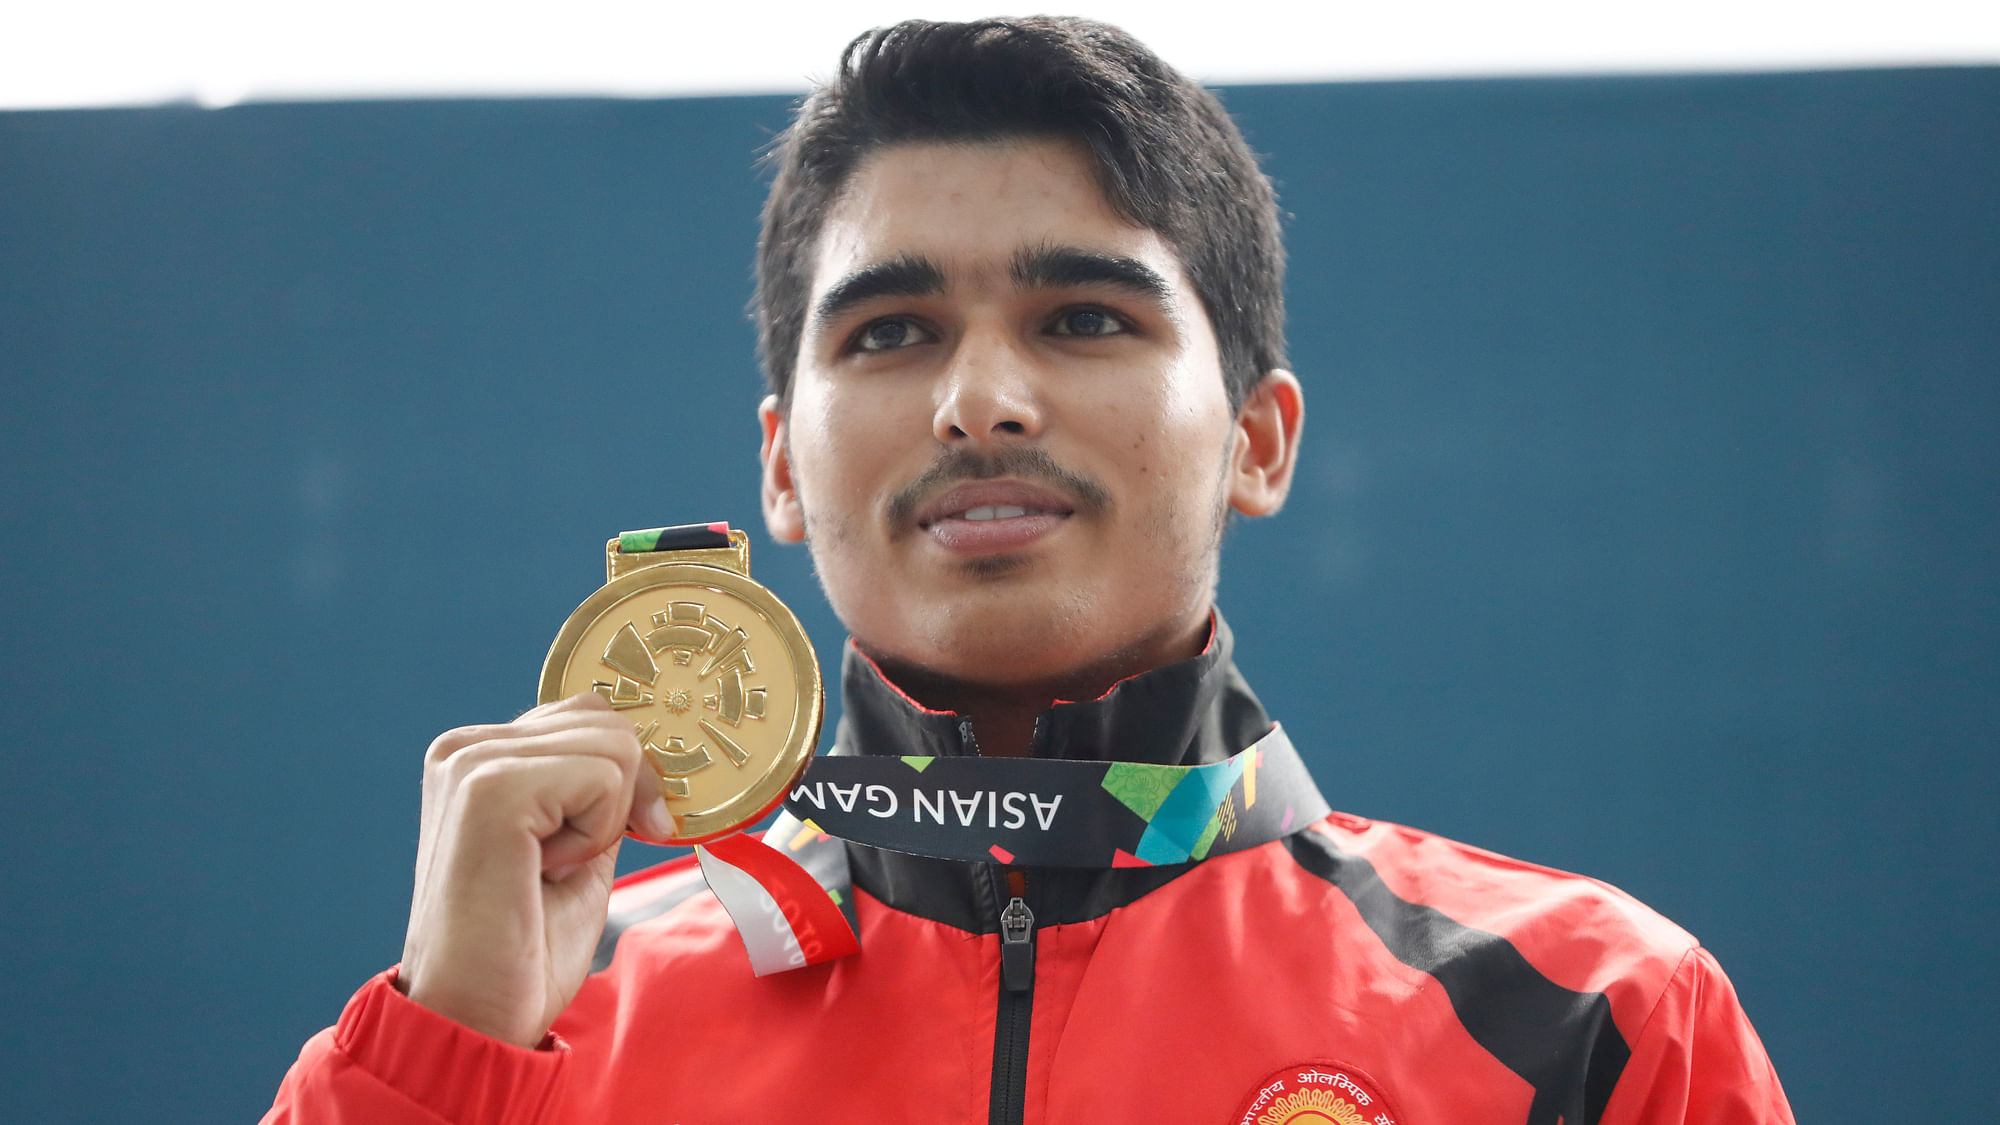 Saurabh Chaudhary won a gold medal for India at the 2018 Asian Games in&nbsp;